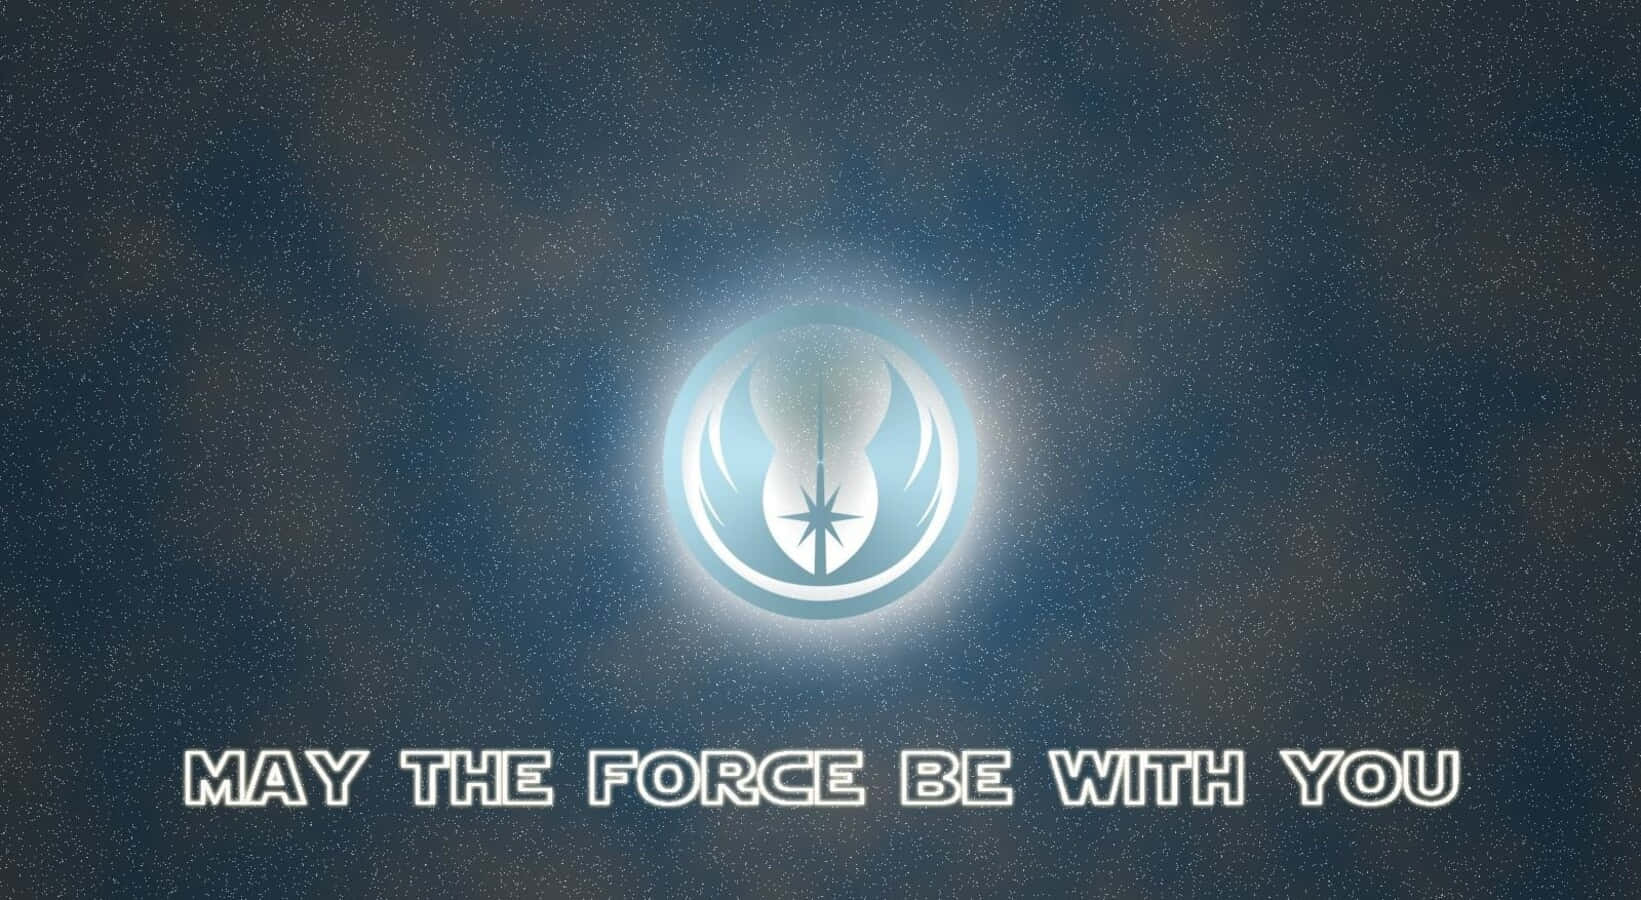 Embrace the Force with Star Wars art Wallpaper